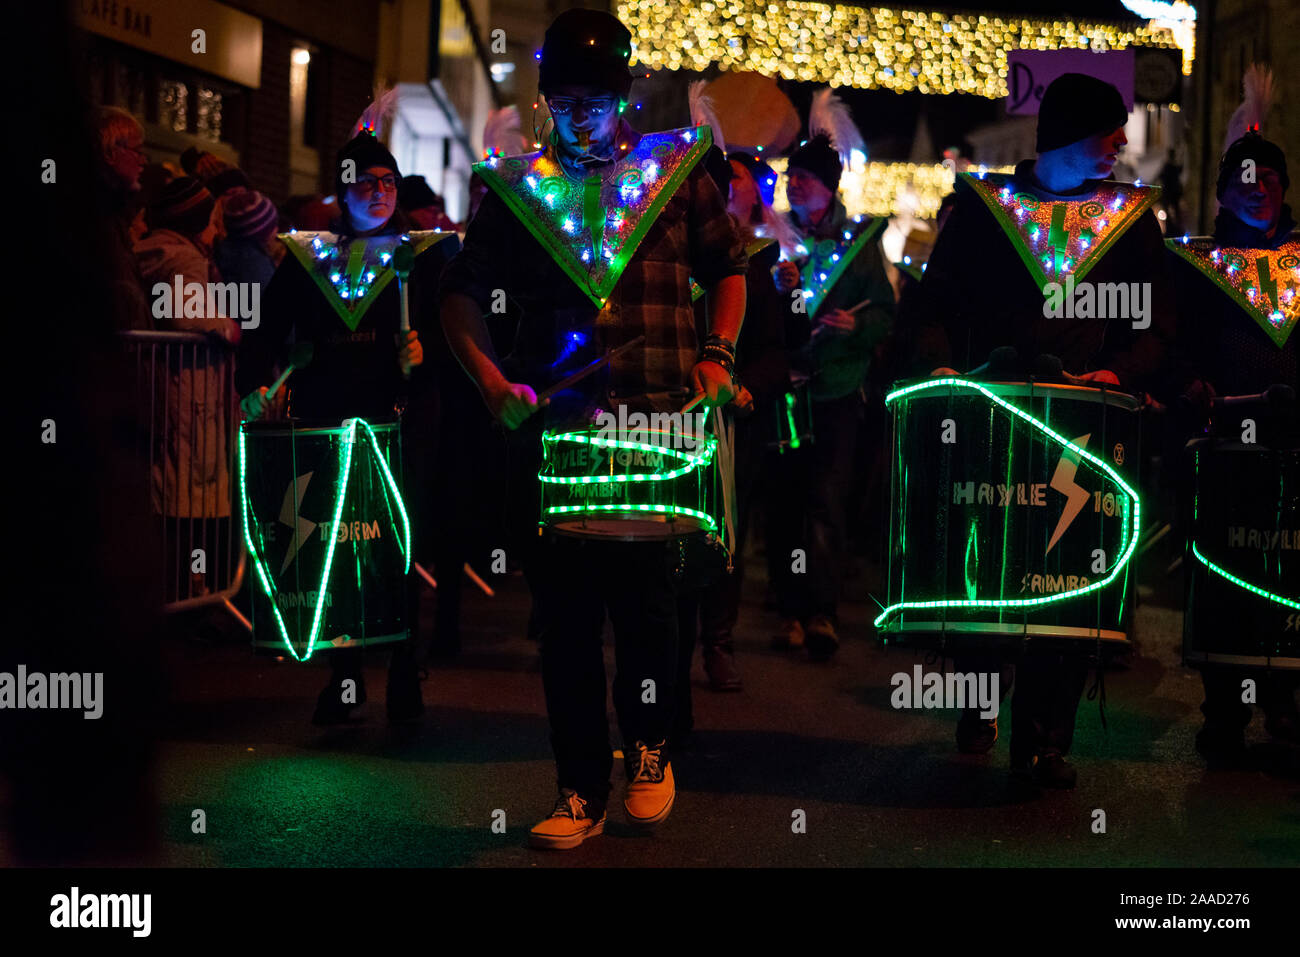 20/11/2019, Truro, Cornwall, UK. Giant paper lanterns eased their way through the streets of Truro for the cities annual Light Parade. Stock Photo